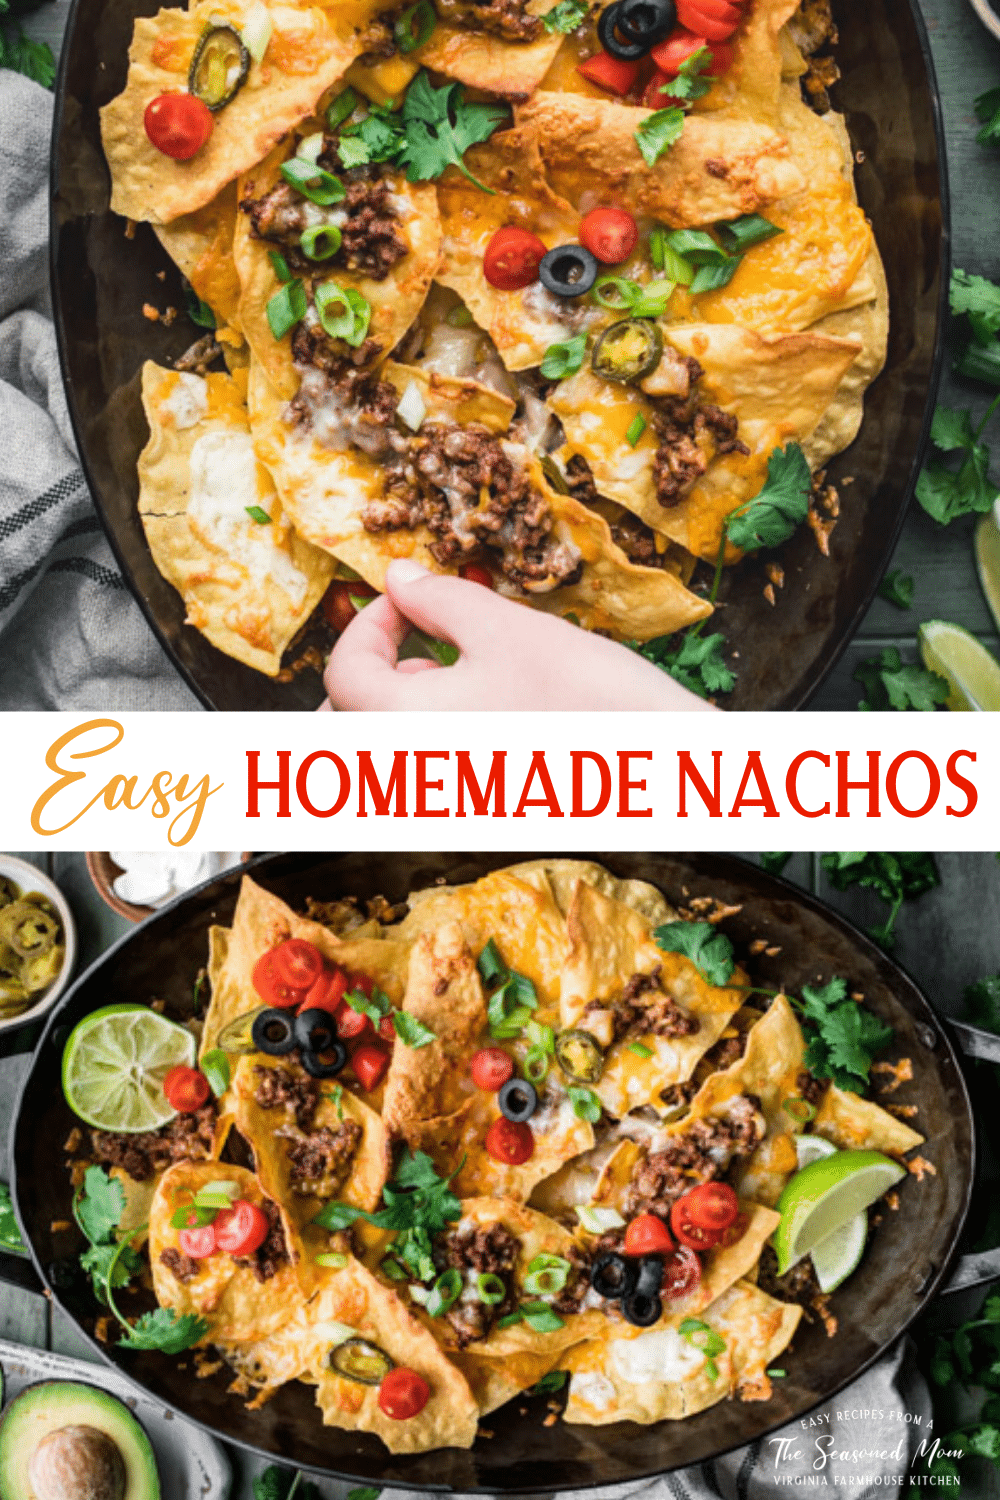 Long collage image of homemade nachos